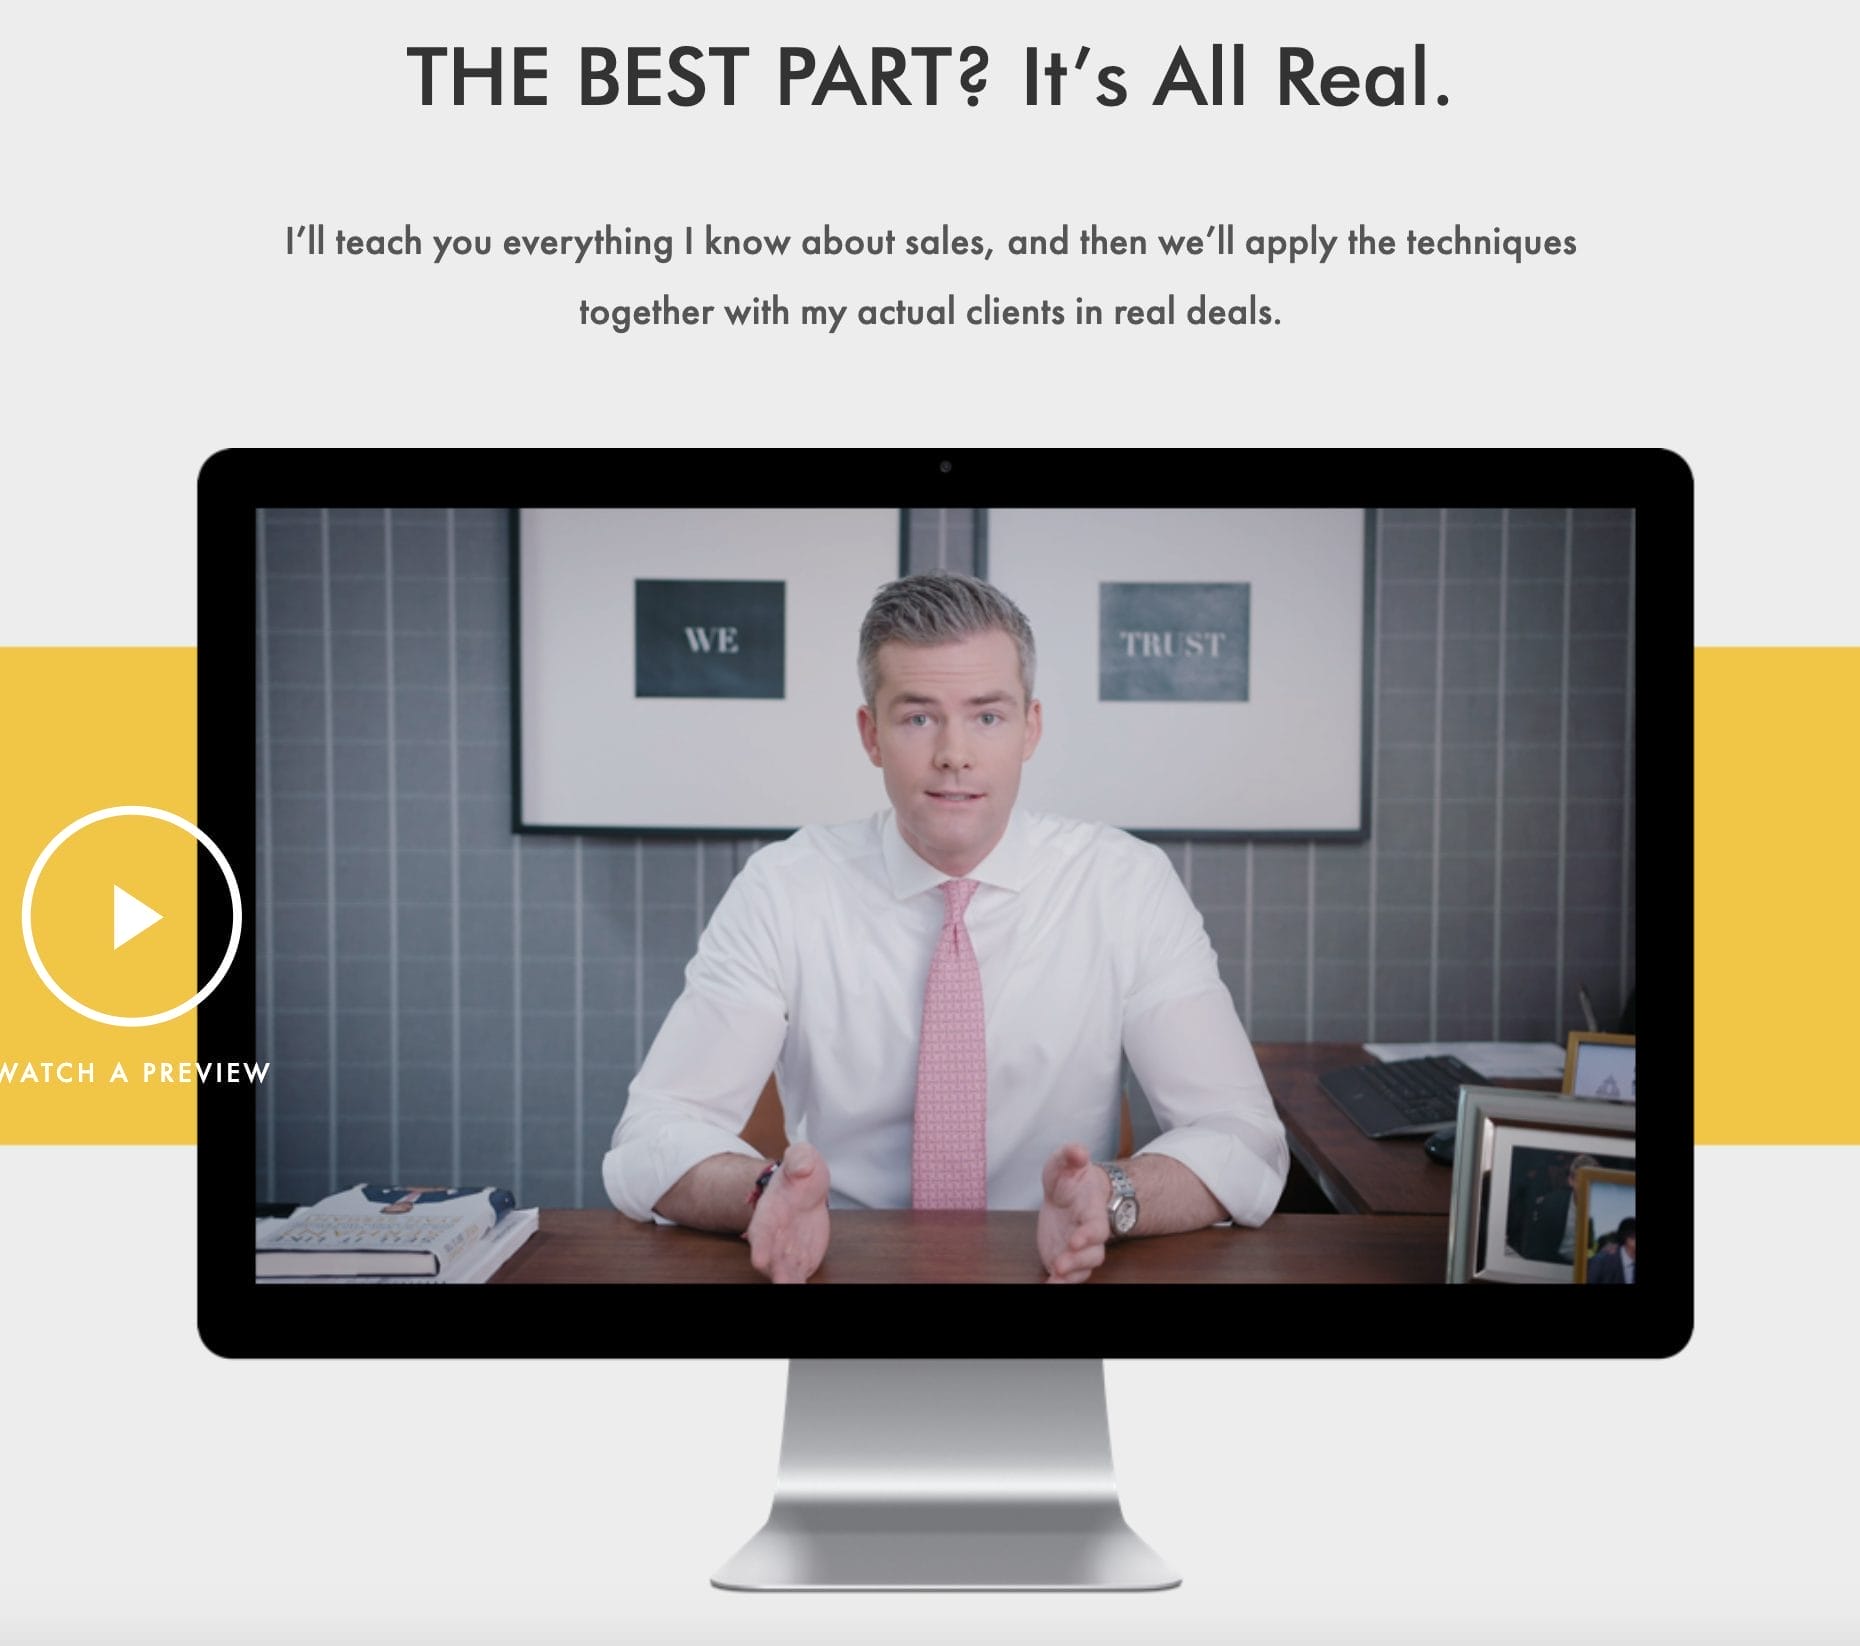 Ryan Serhant – The Ultimate Personal Brand Course